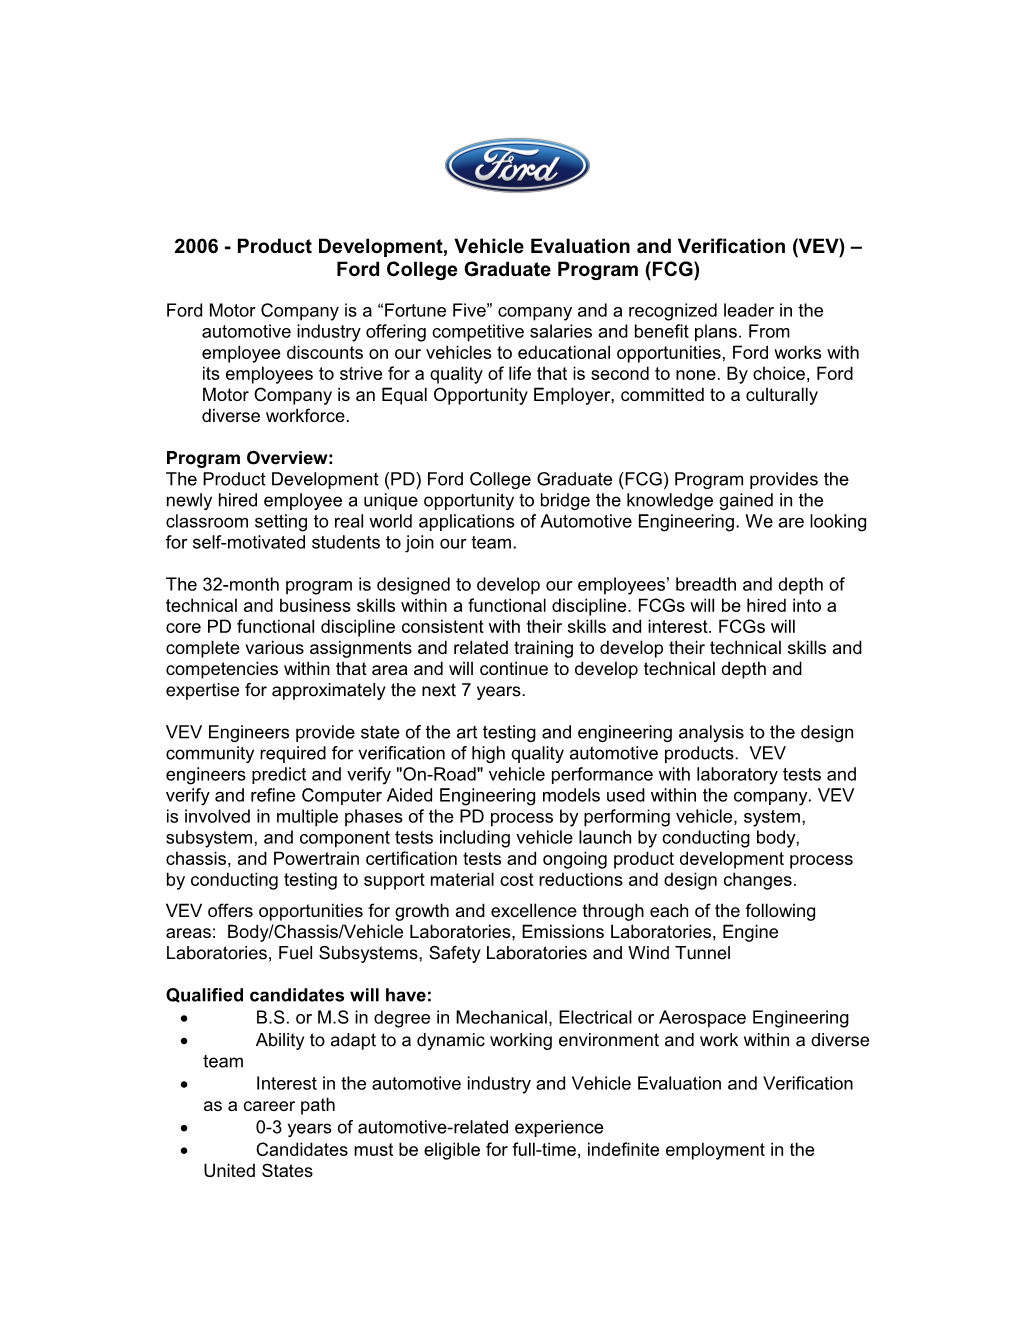 2006 - Product Development, Vehicle Evaluation and Verification (VEV) Ford College Graduate